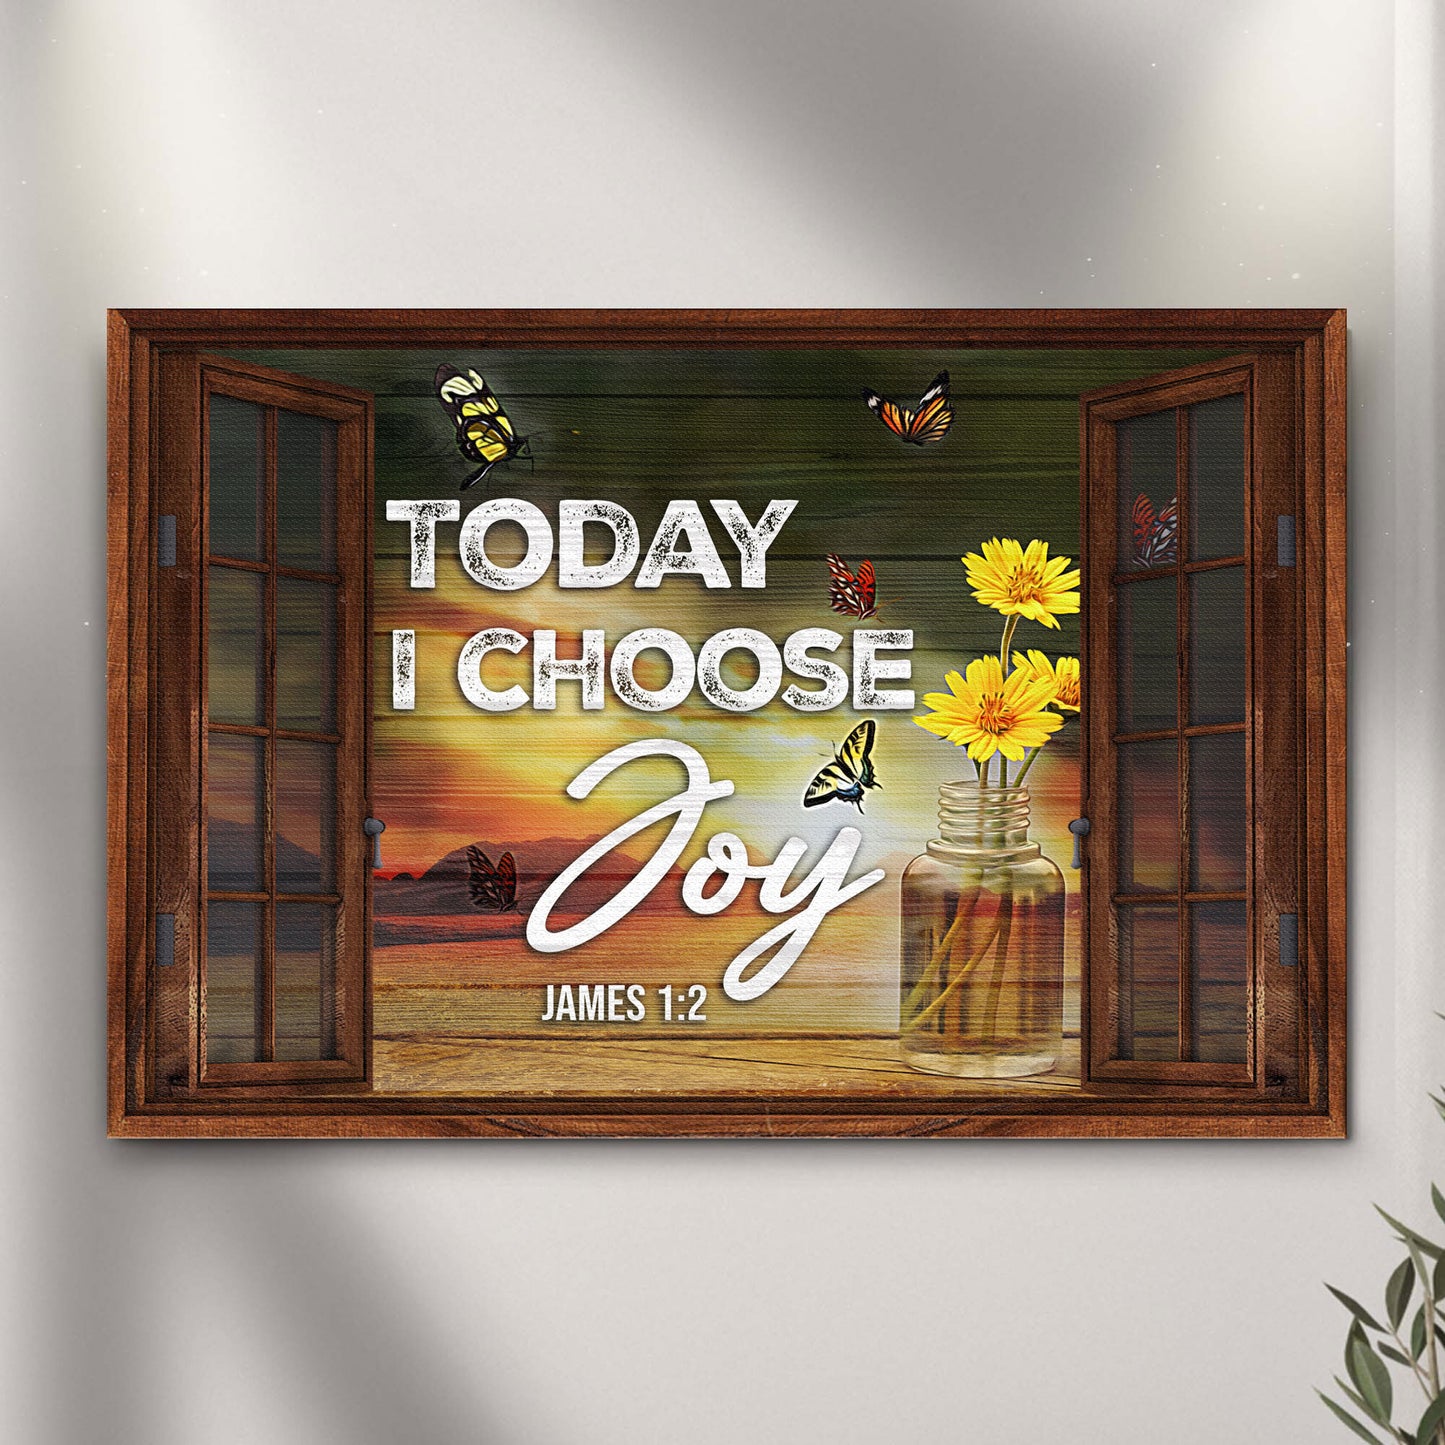 James 1:2 - Today I Choose Joy Sign III - Image by Tailored Canvases